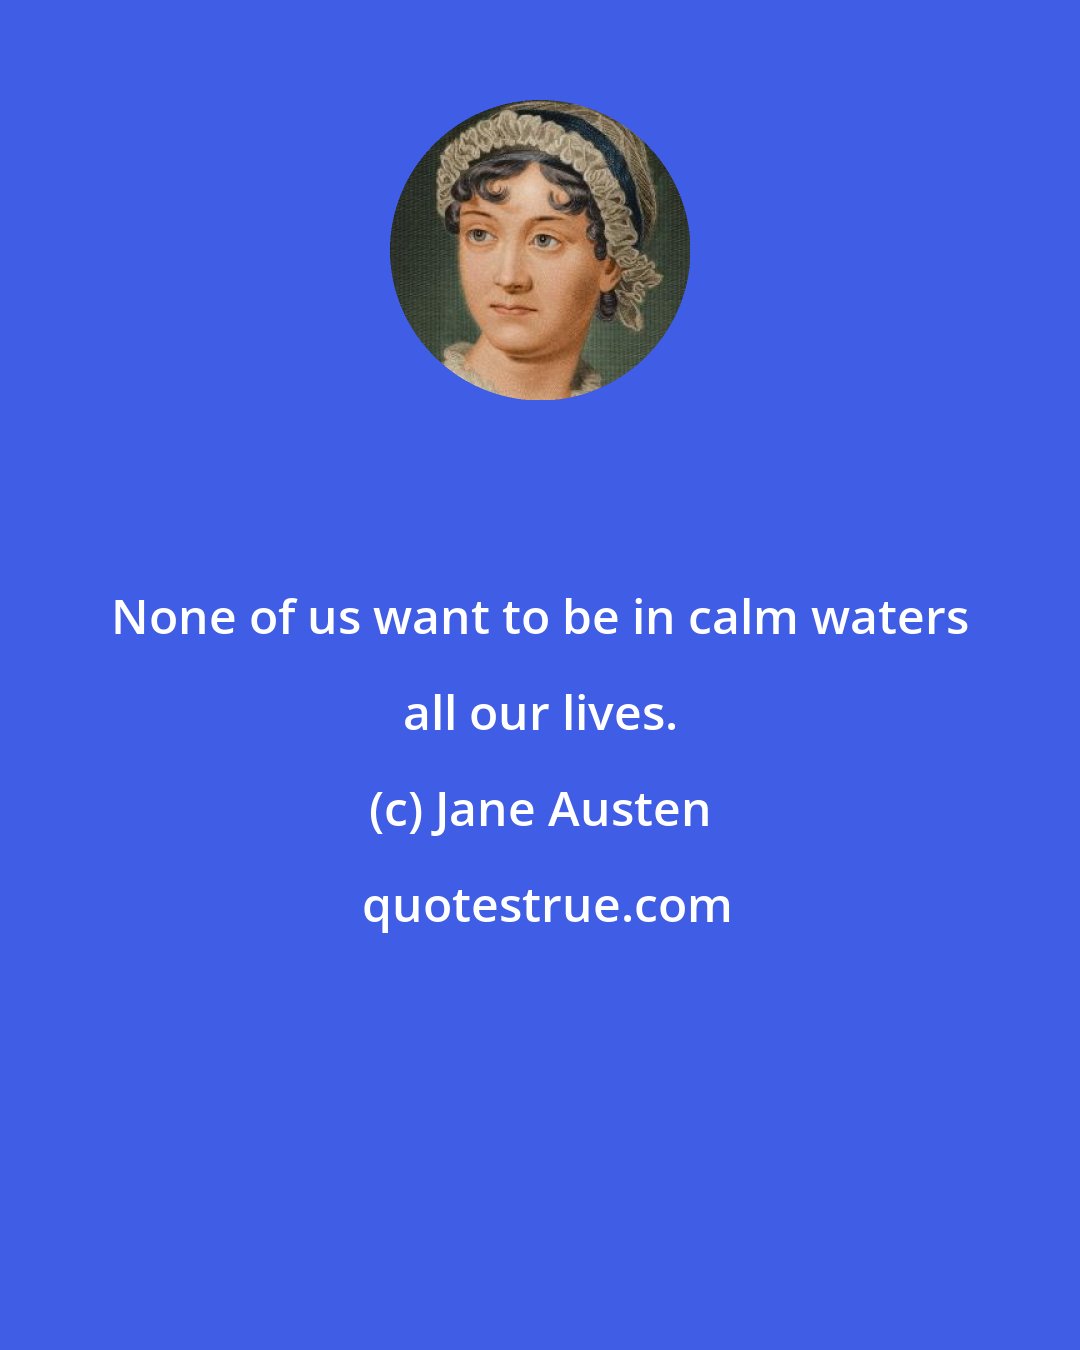 Jane Austen: None of us want to be in calm waters all our lives.